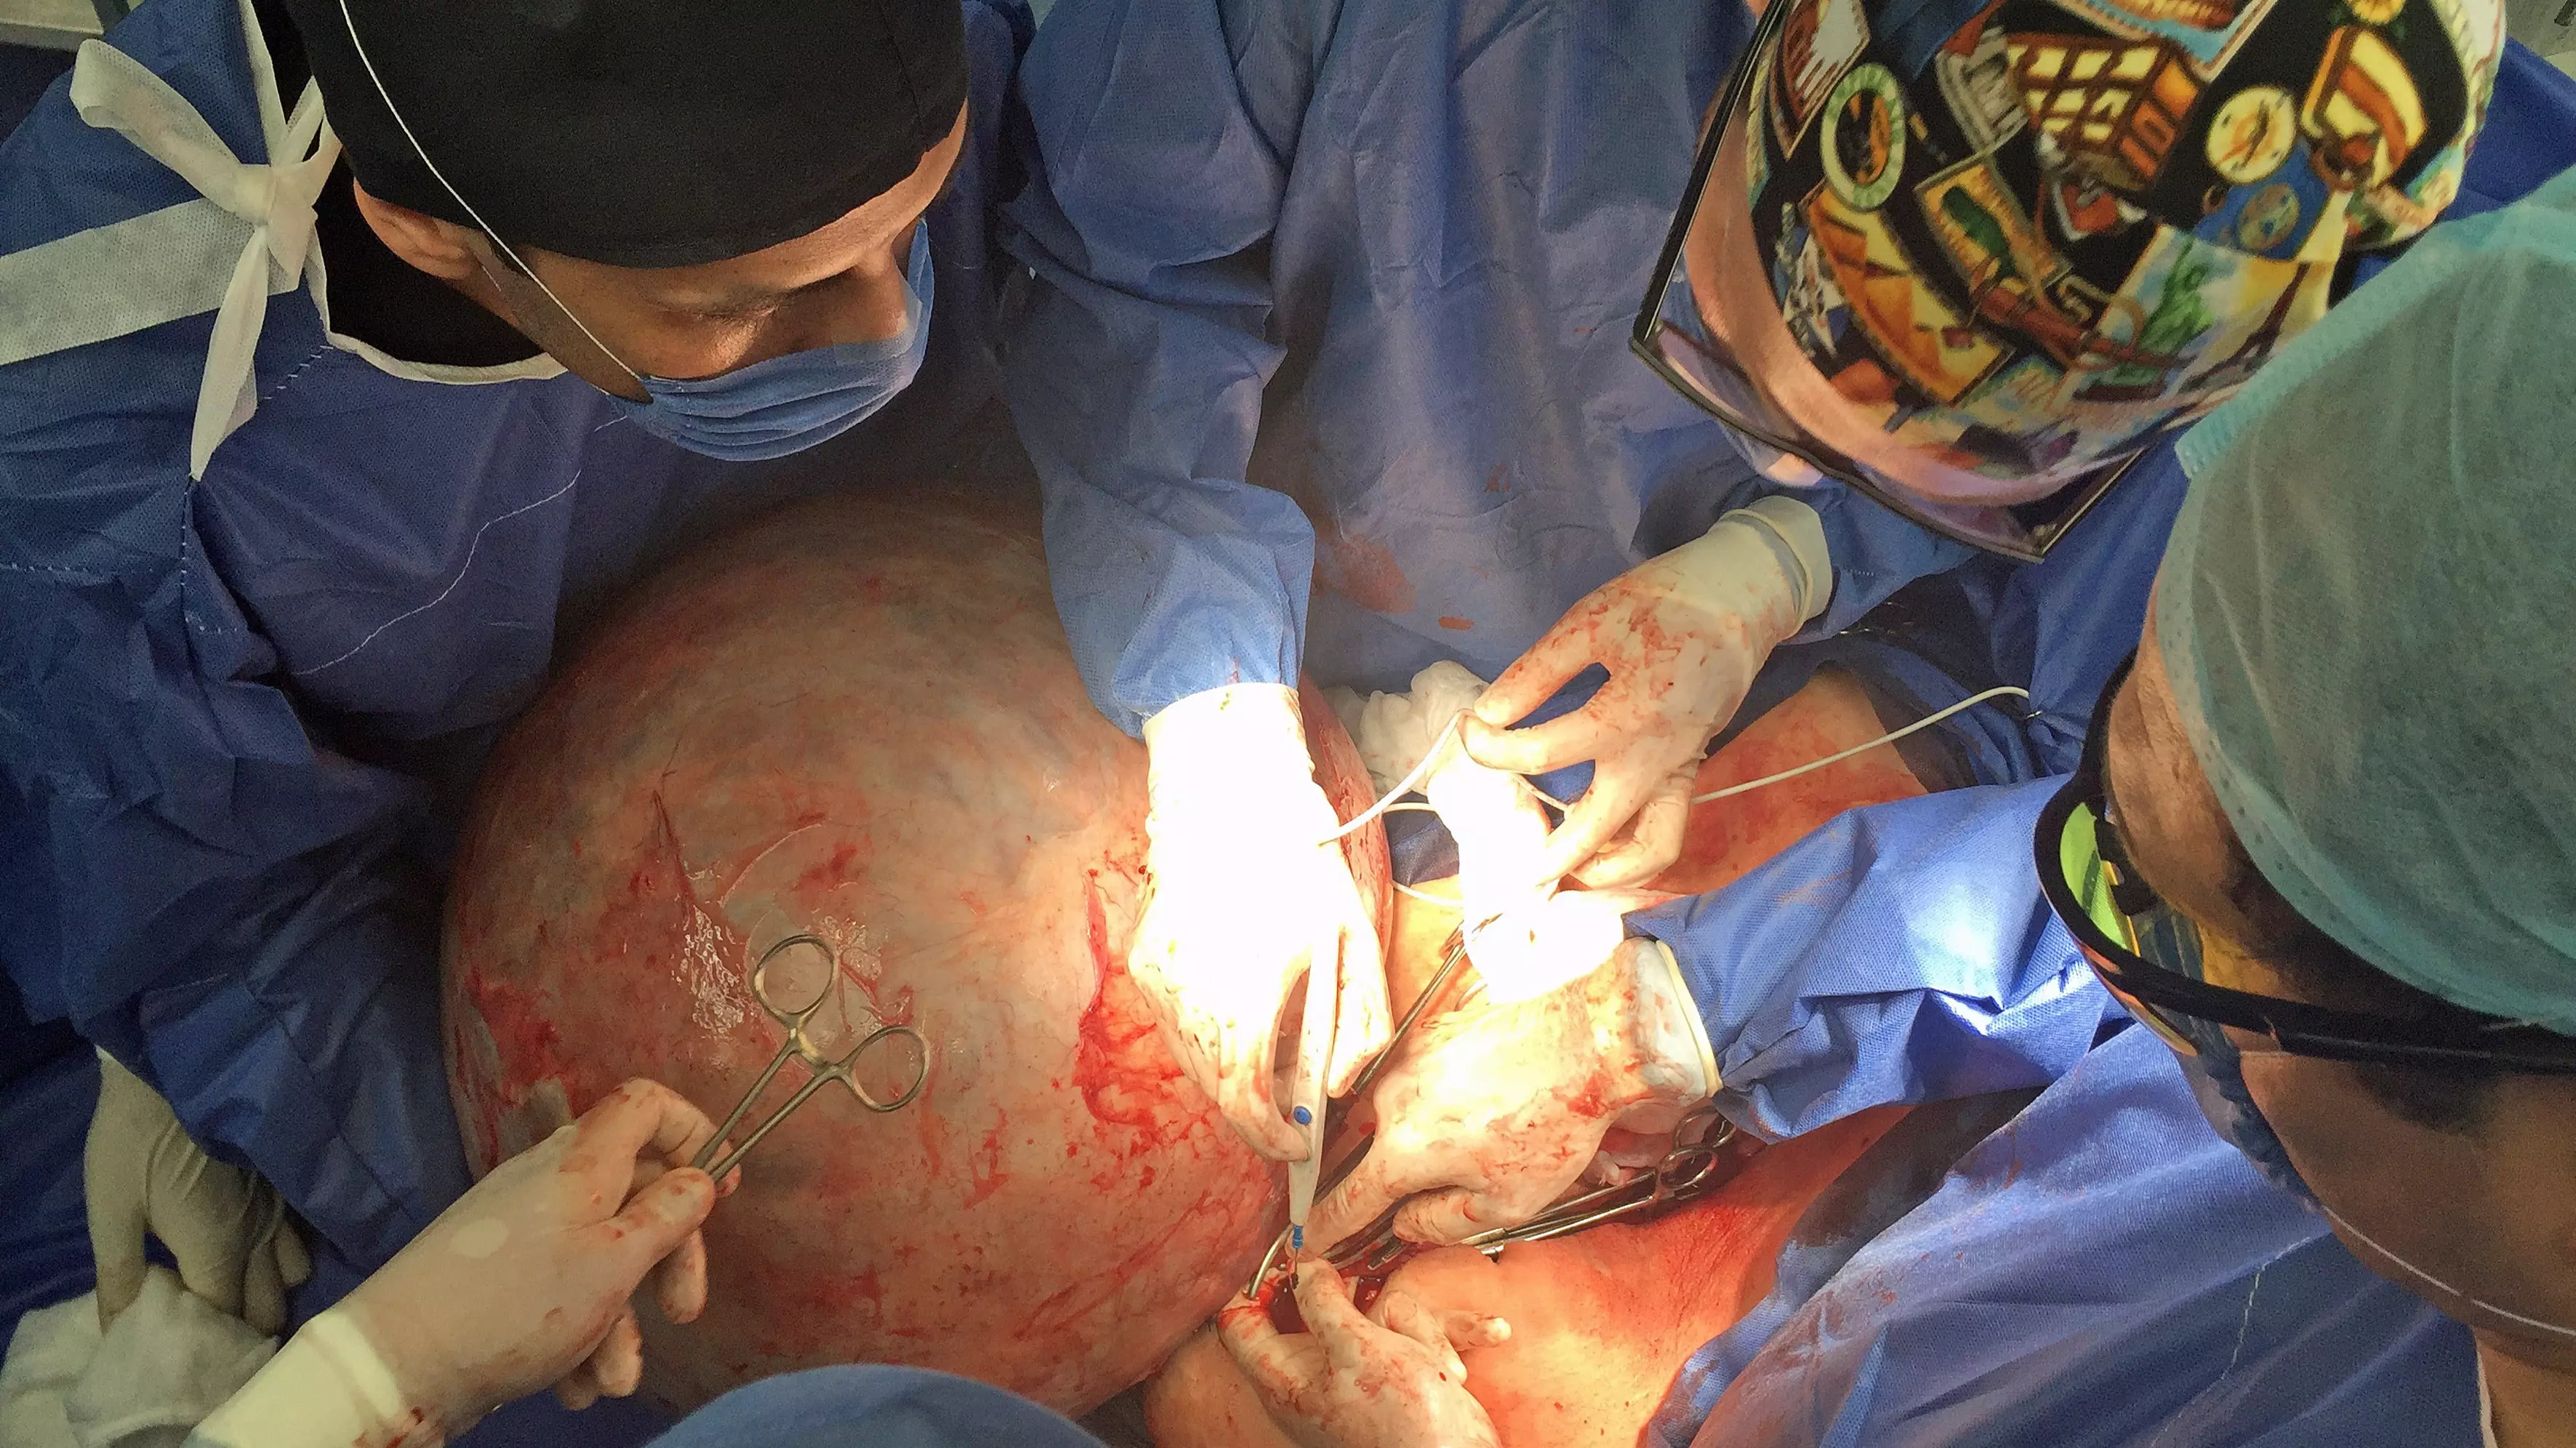 Video Shows Worlds Biggest Cyst Being Removed Saving Woman's Life